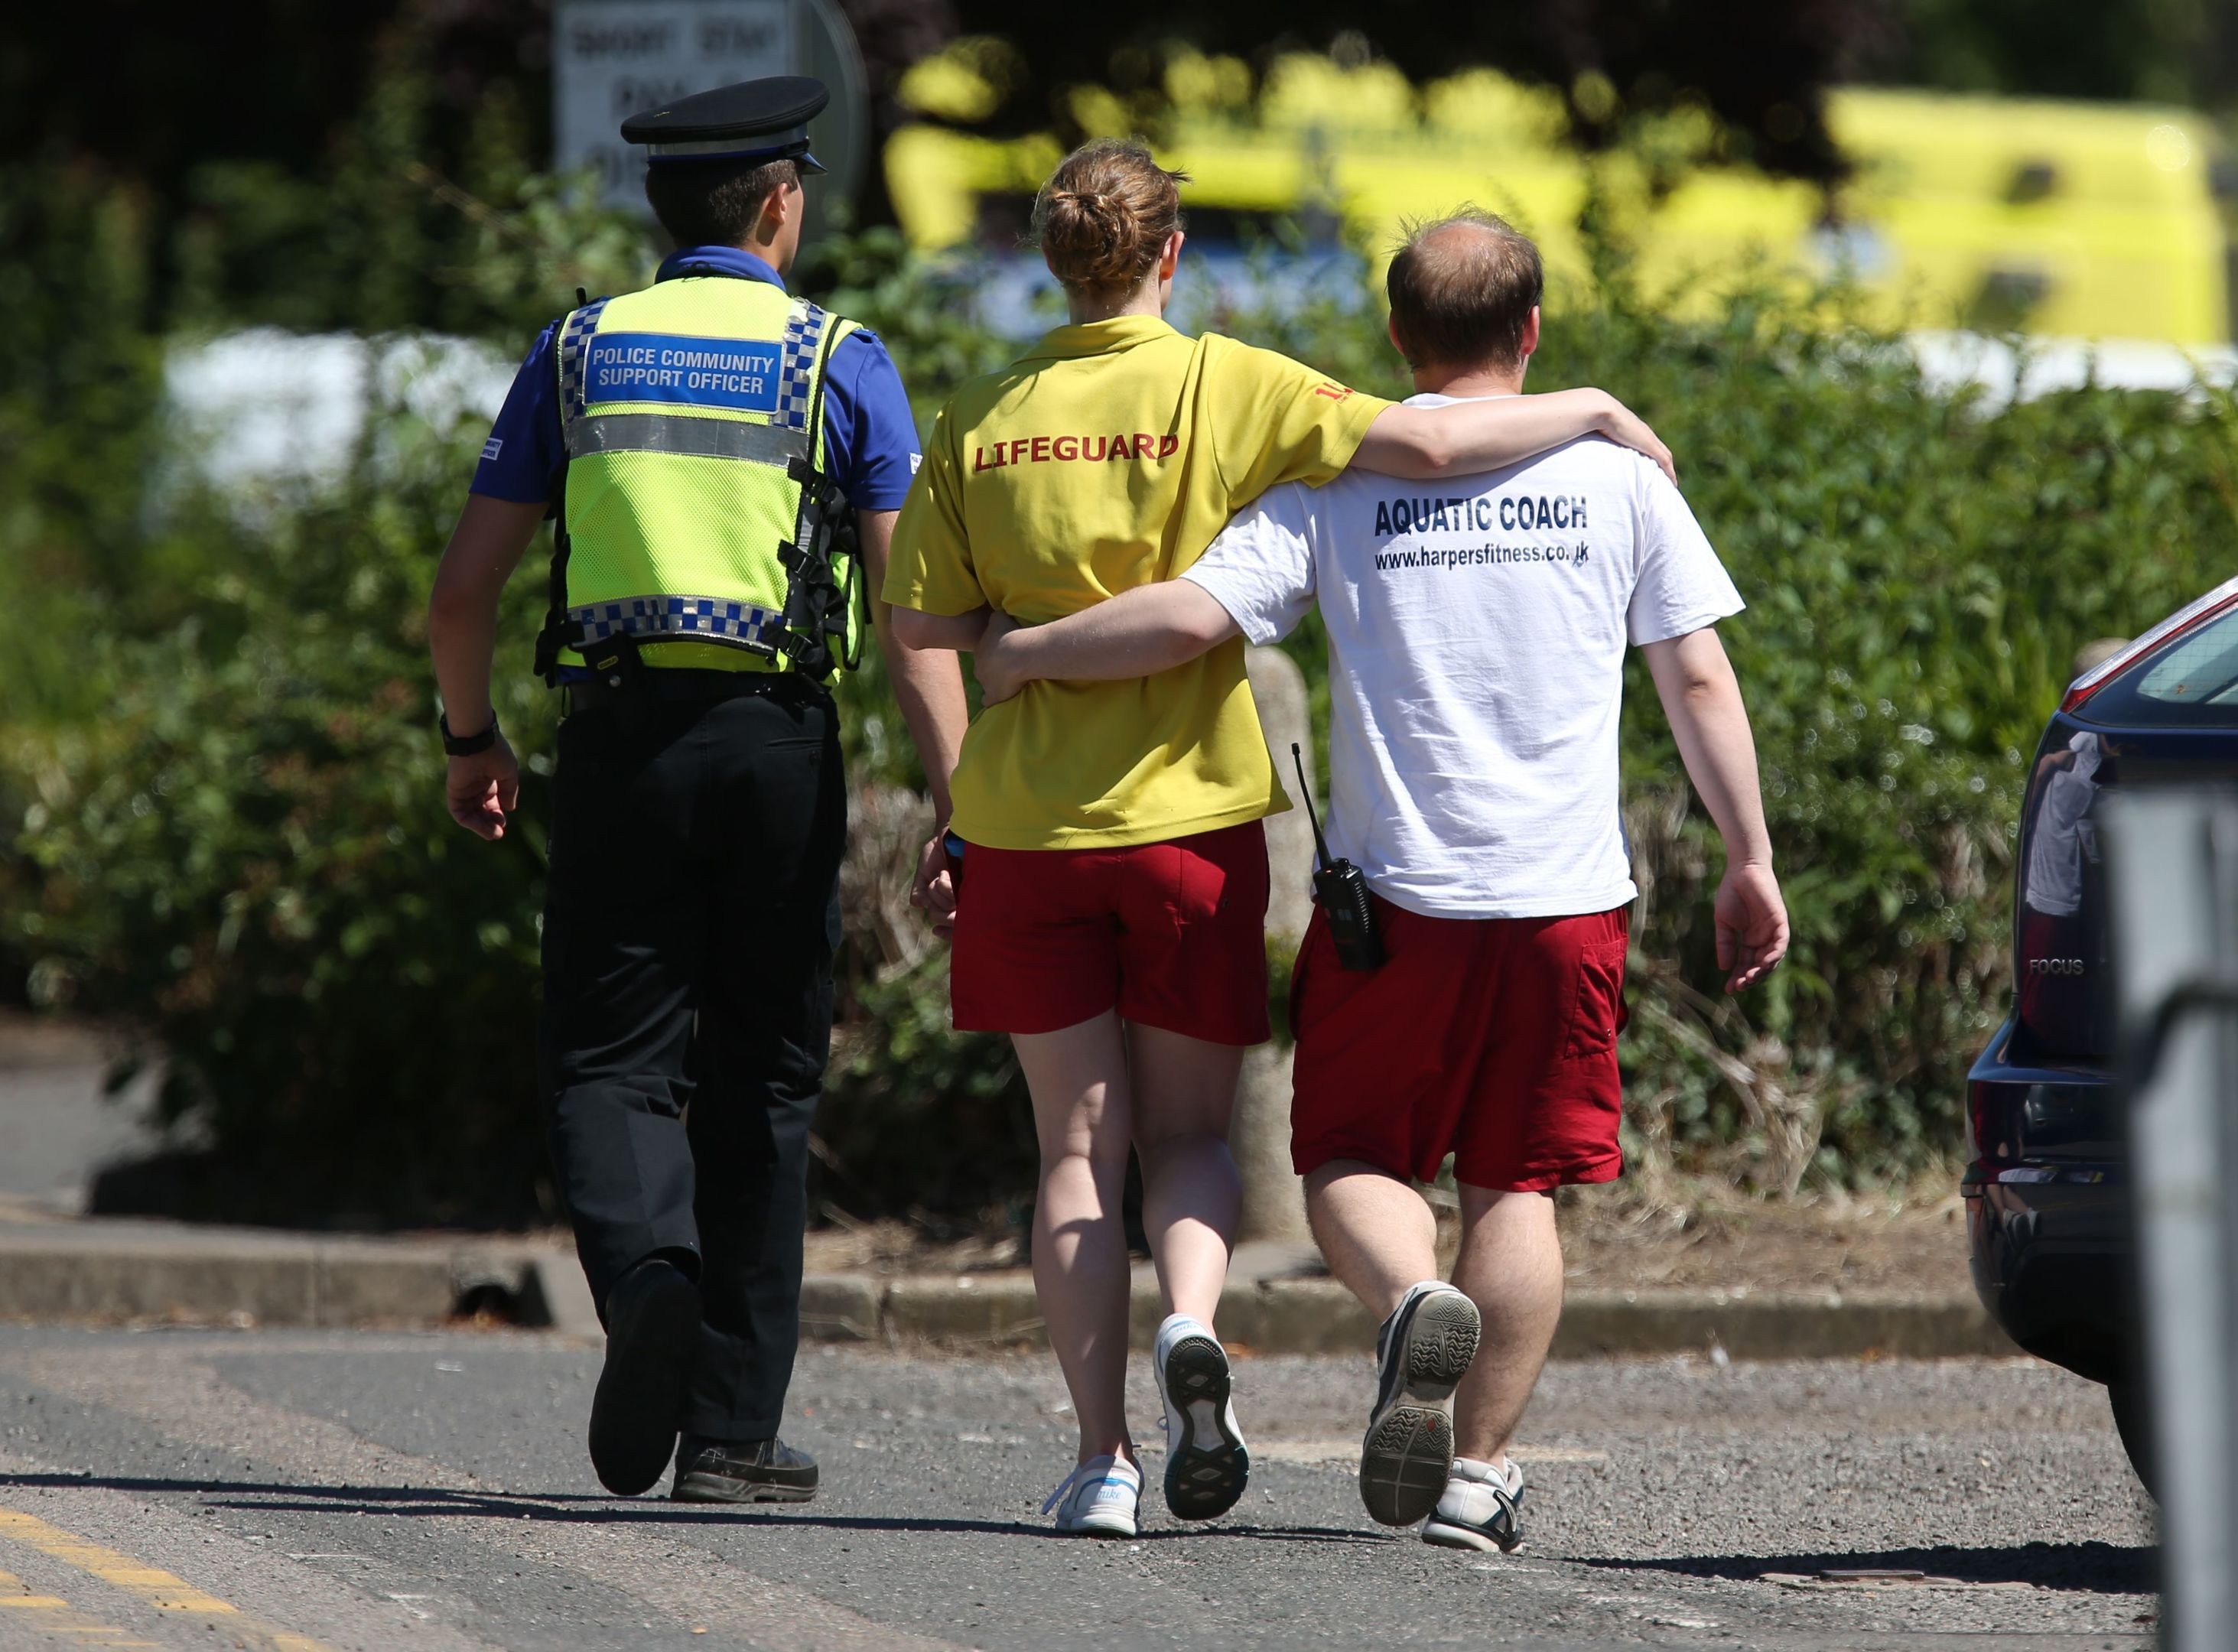 A lifeguard and swimming coach are escorted by a community support officer as they walk towards Castle Swimming Pool in Spalding, Lincolnshire, after three people including a suspected gunman have been shot dead.